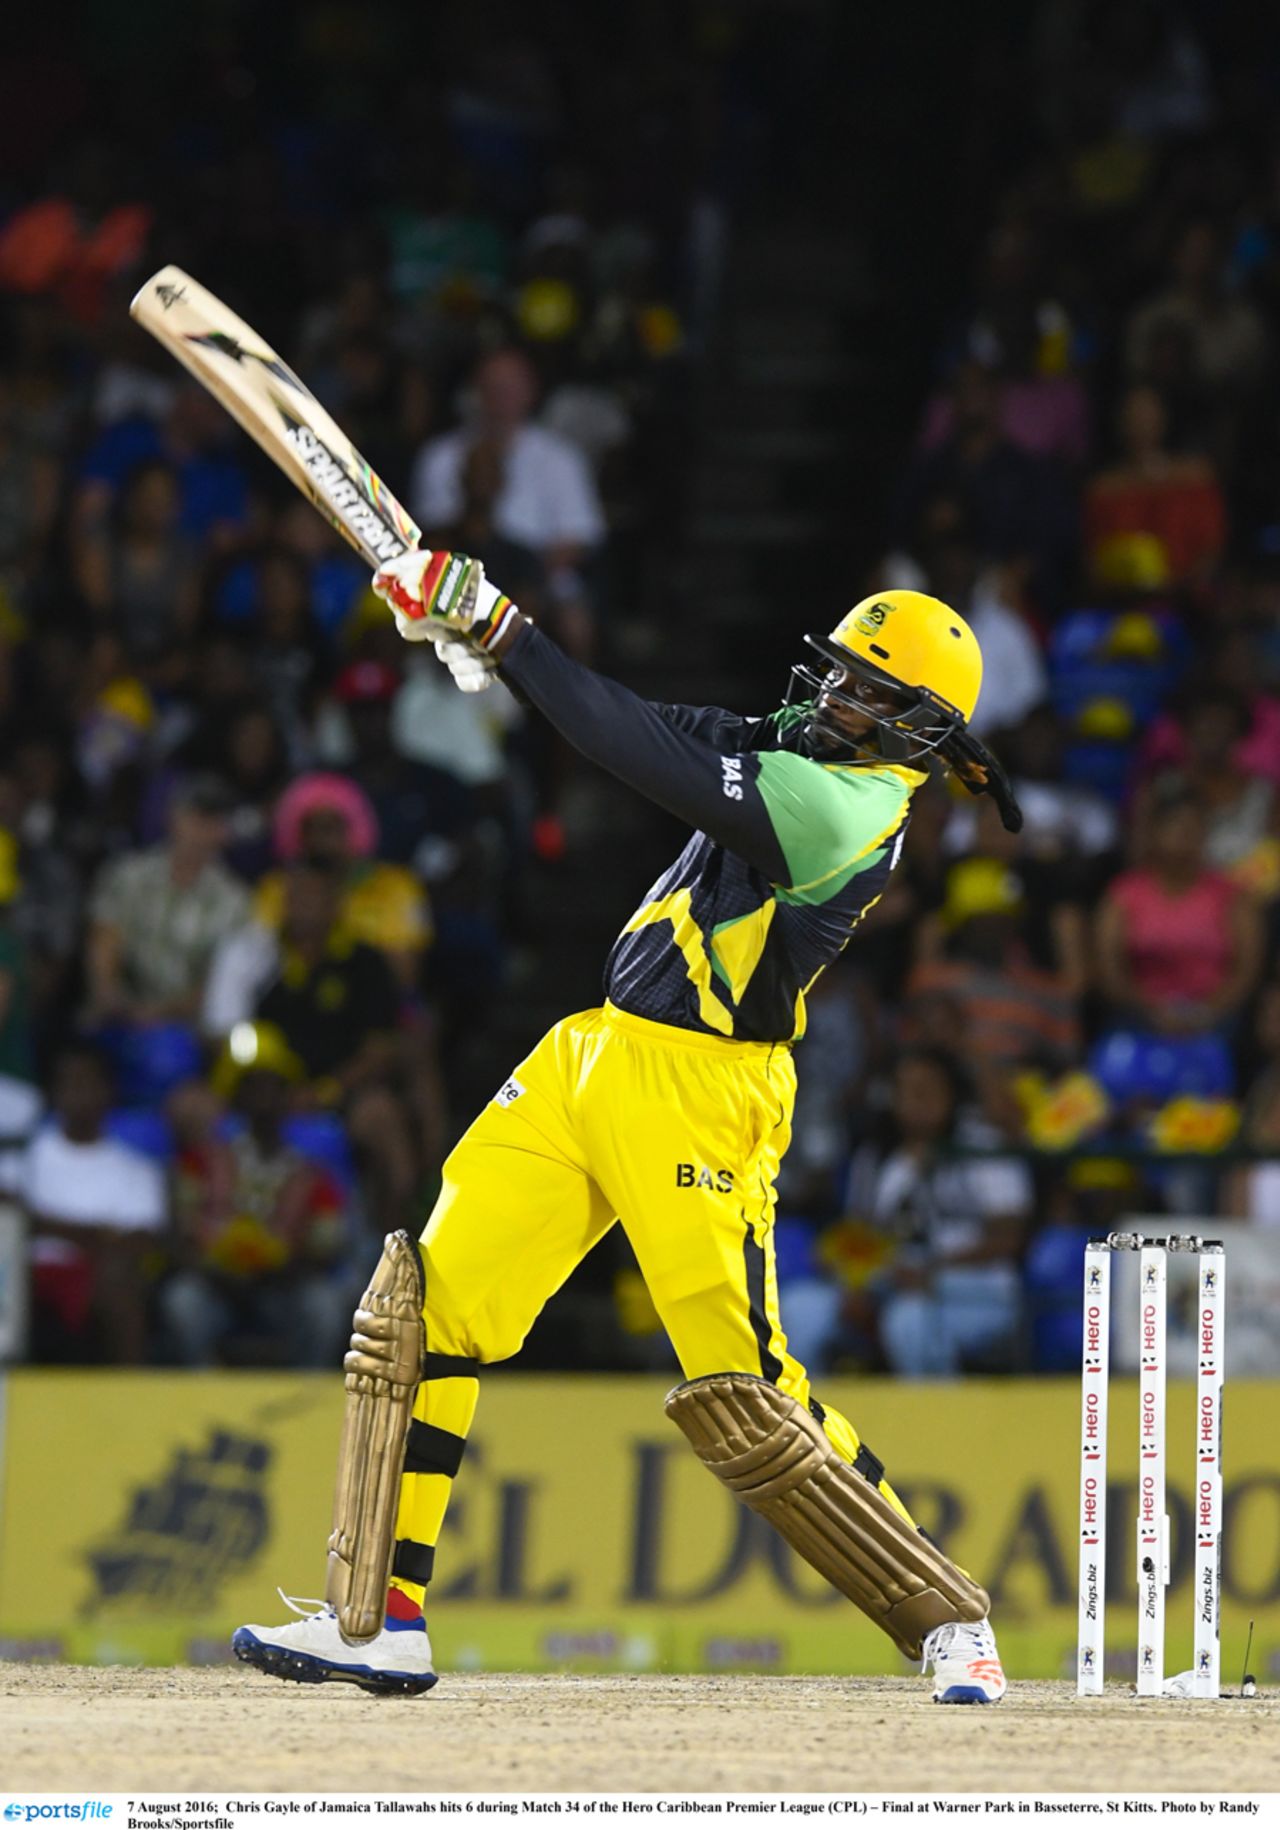 Chris Gayle launches one into the stands, CPL 2016, final, St Kitts, August 7, 2016